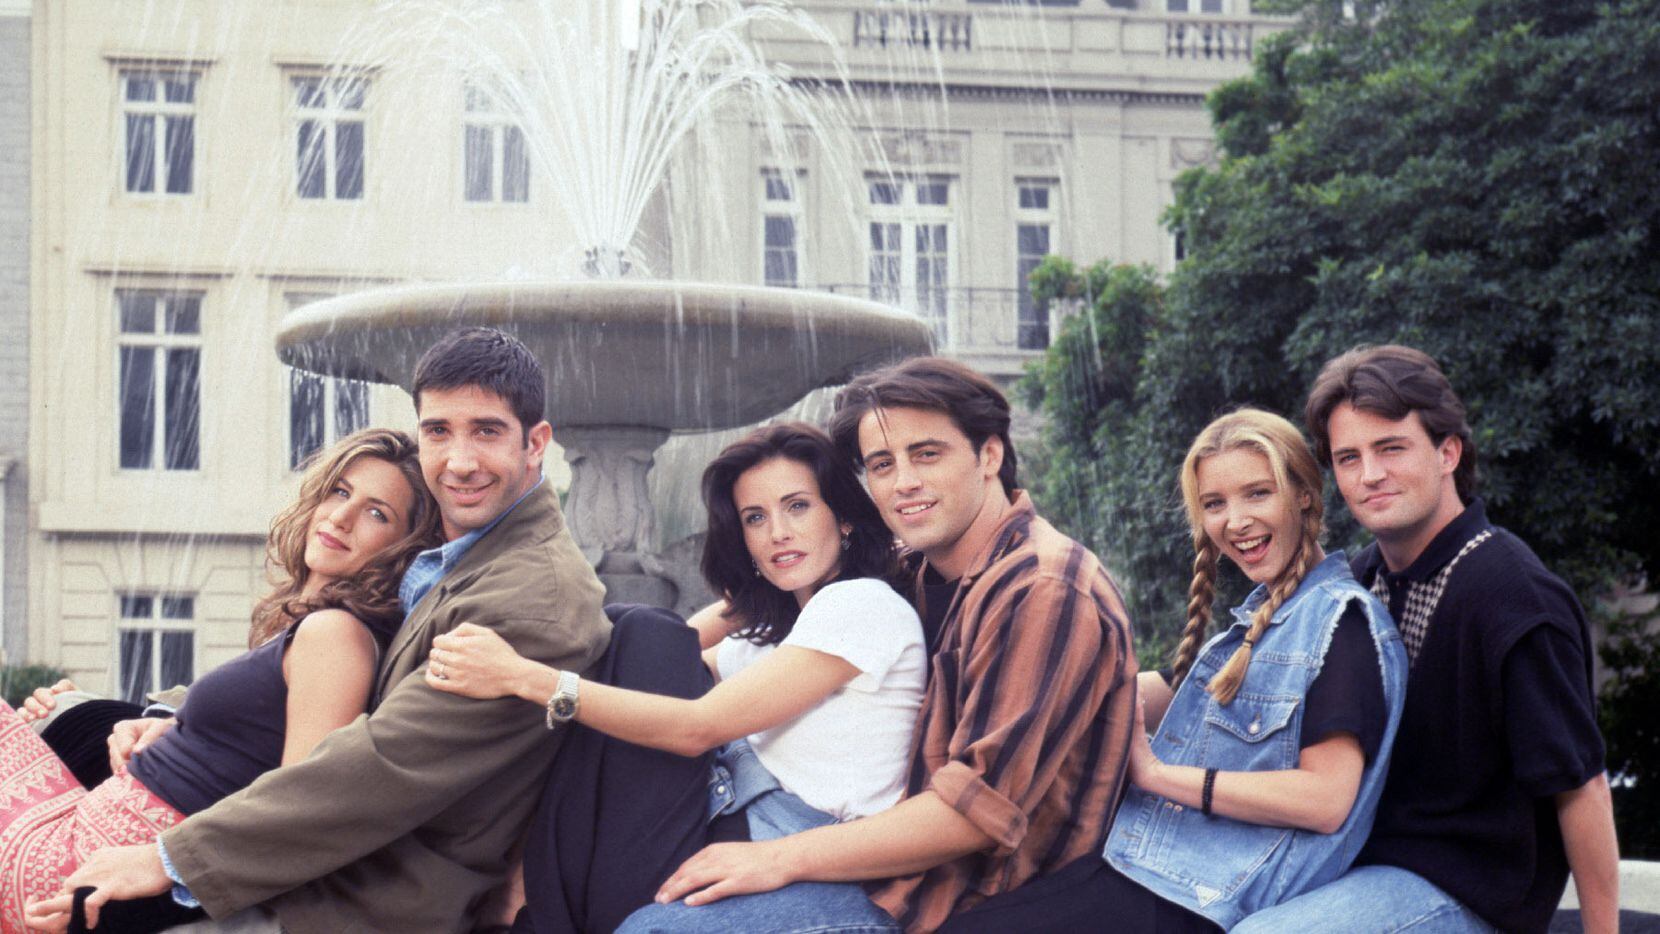 We can be fairly certain that the stars of 'Friends,' Jennifer Aniston, David Schwimmer, Courteney Cox, Matt LeBlanc, Lisa Kudrow and Matthew Perry, will not be at The Whippersnapper when it reopens. But the Dallas bar will honor one of the most popular TV shows of all time.